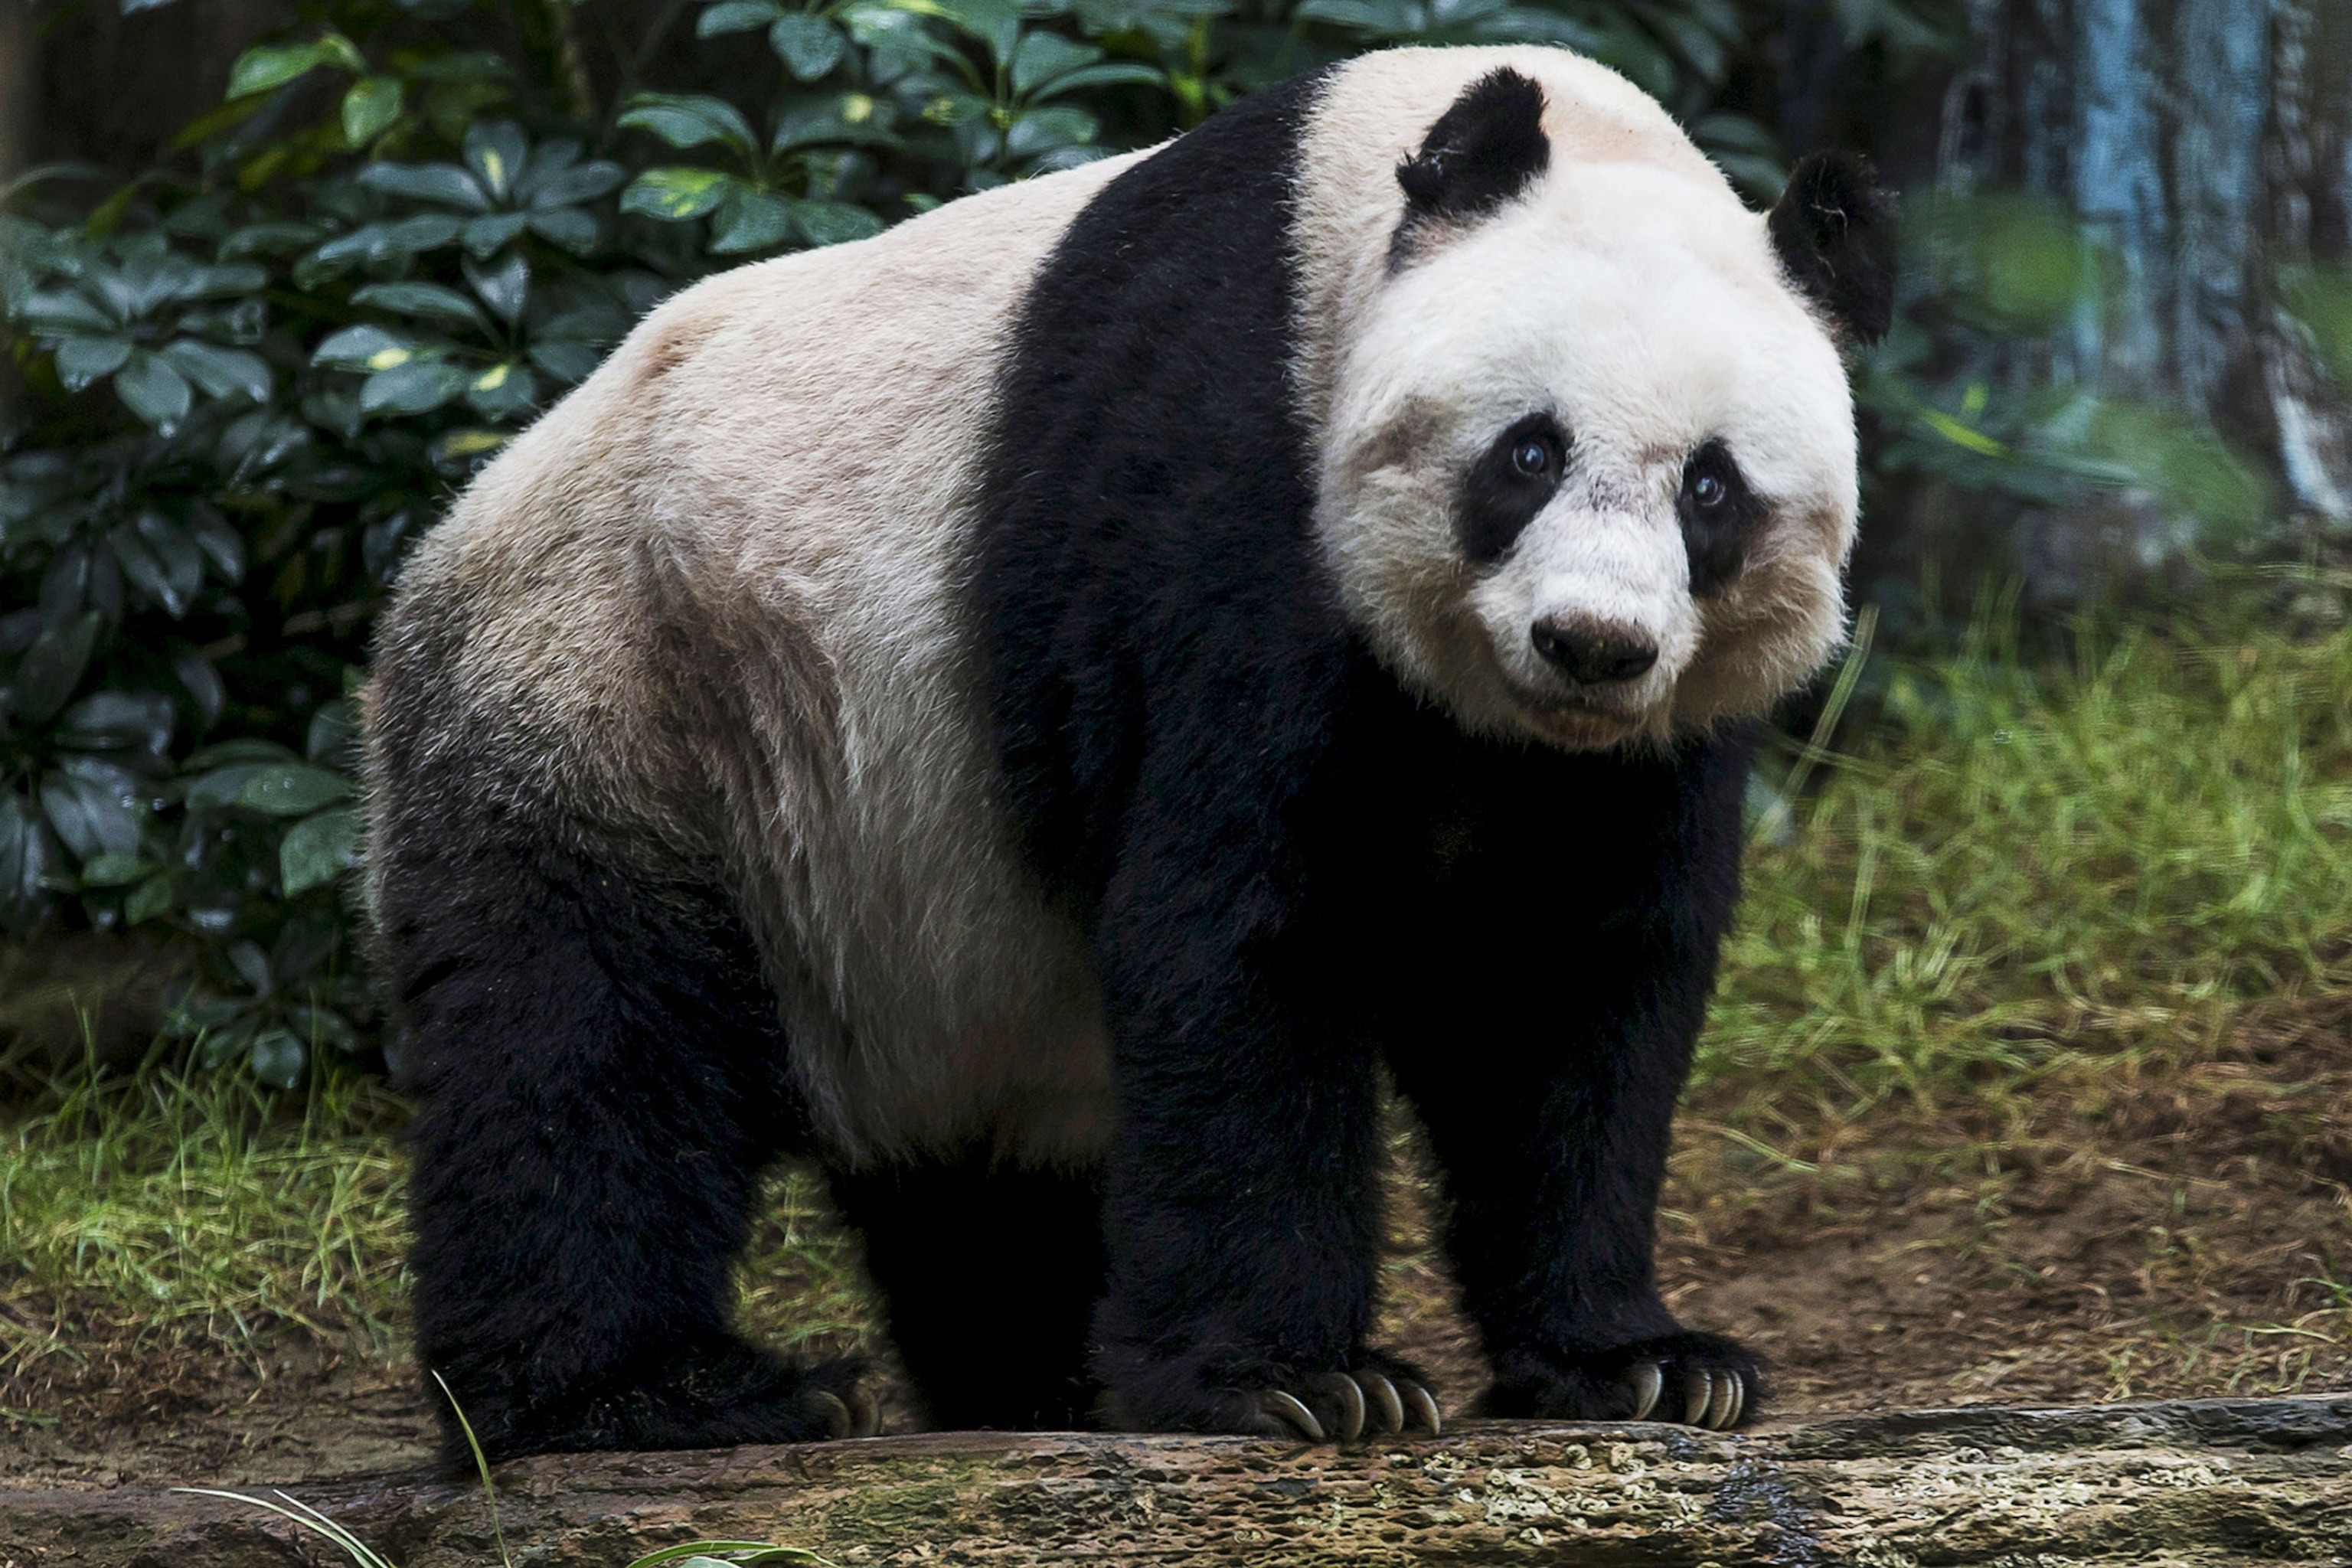 What is the name of the oldest panda who died at the age of 114 in 2016?